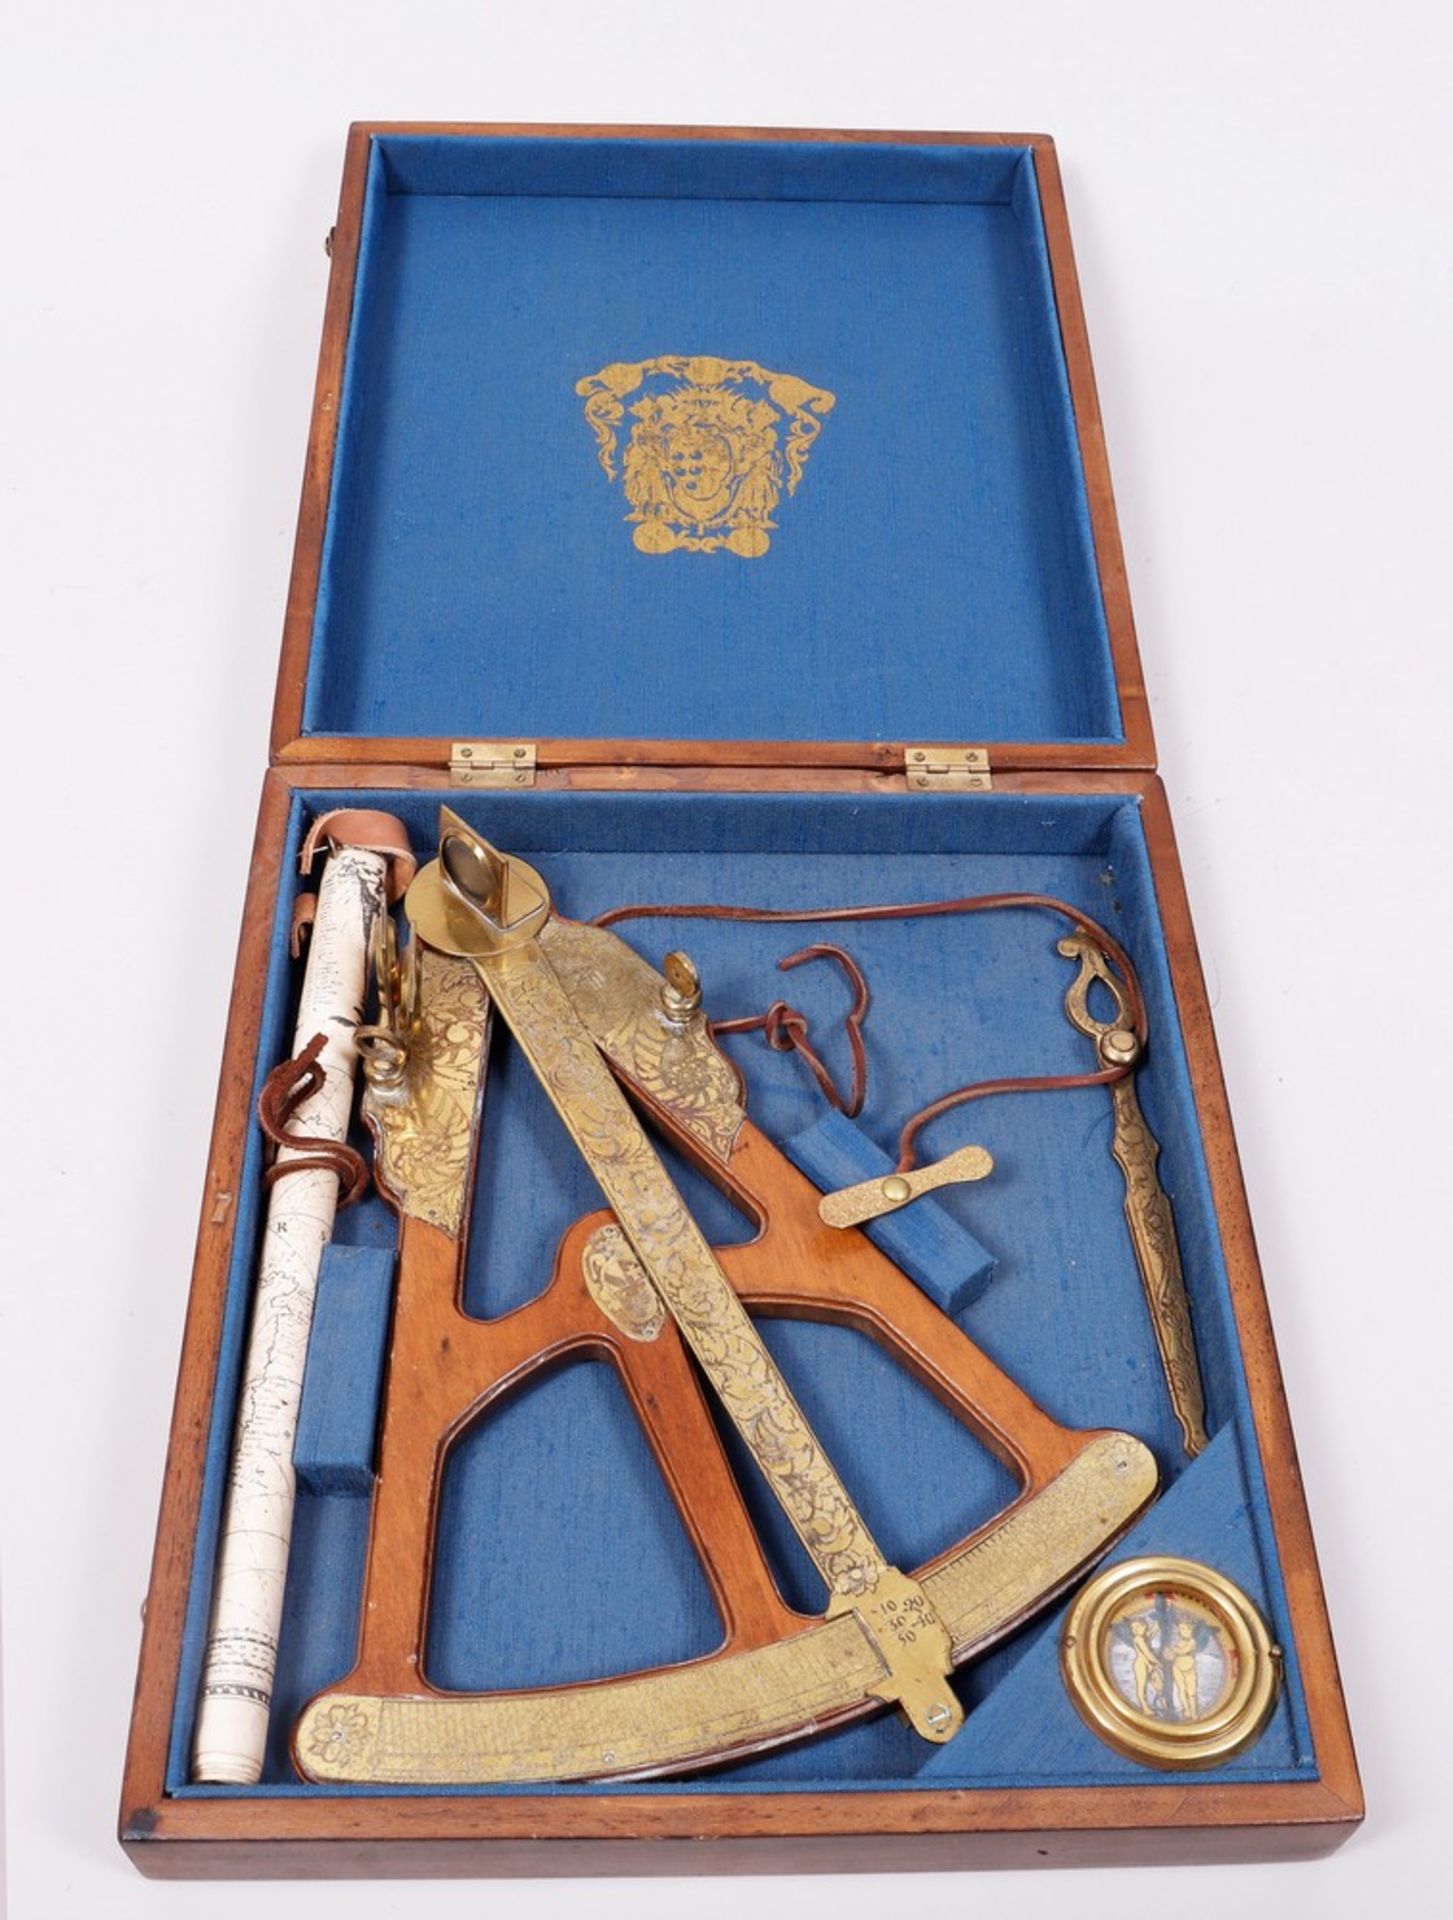 Octant in transport box, replica of an original from the Baroque period